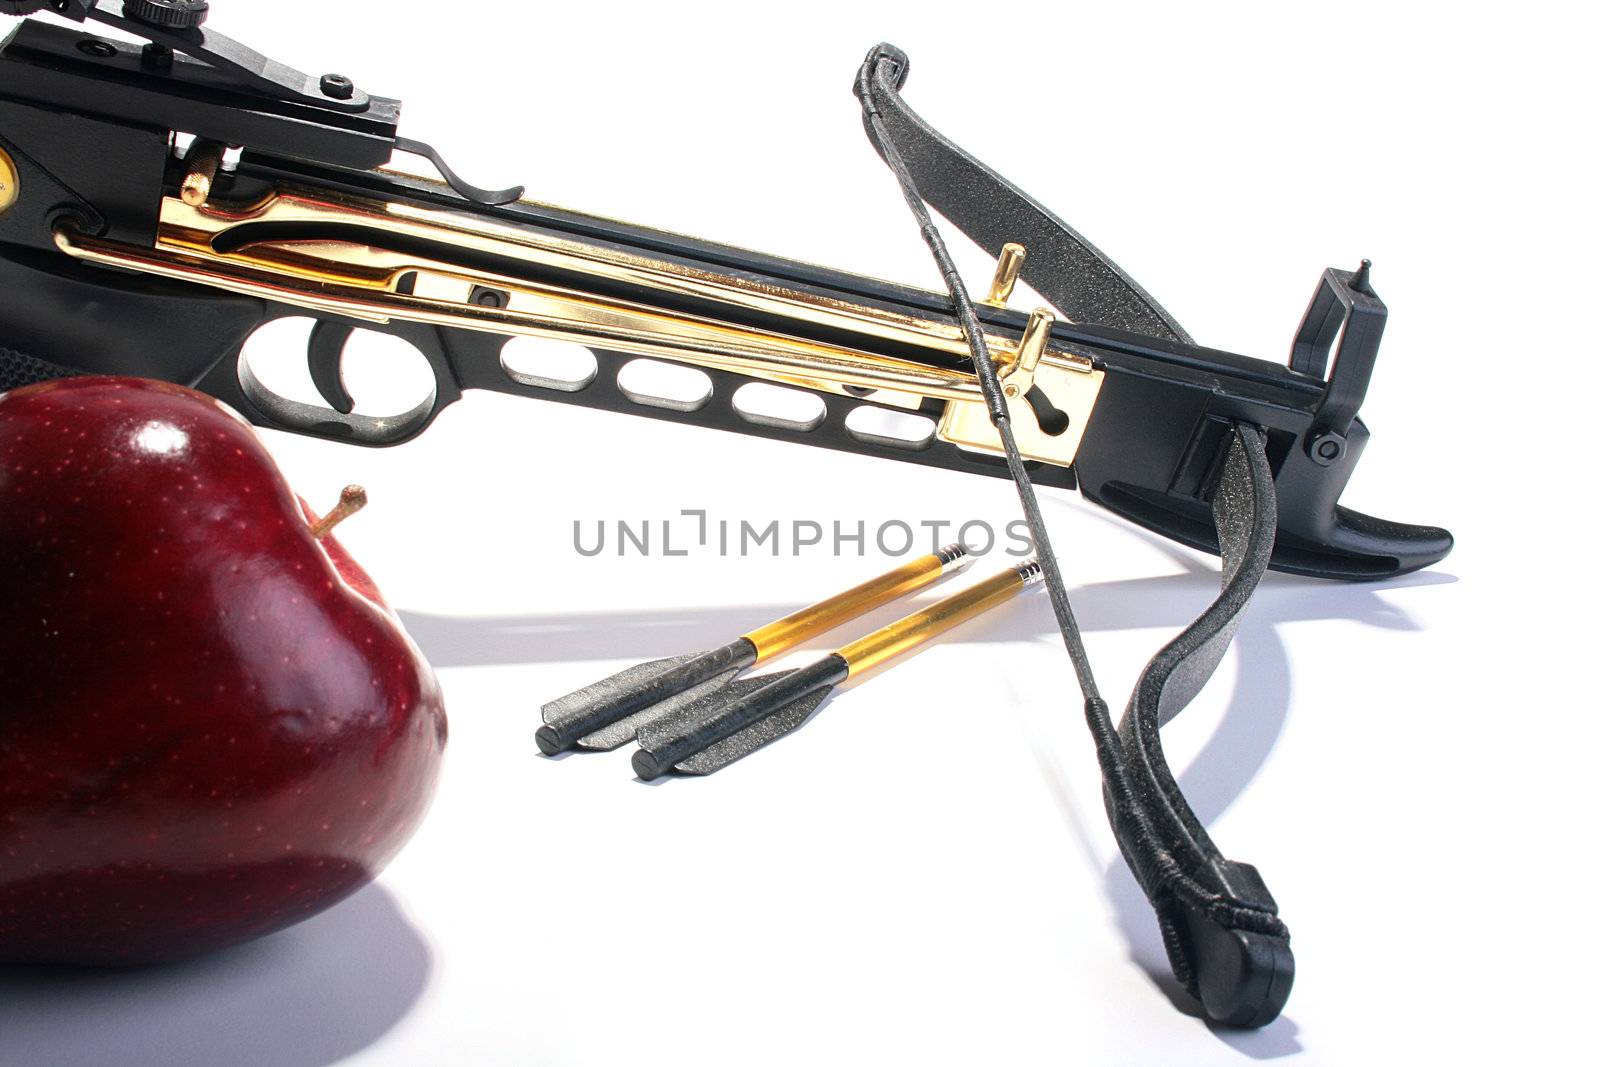 Crossbow with arrows and a red apple.